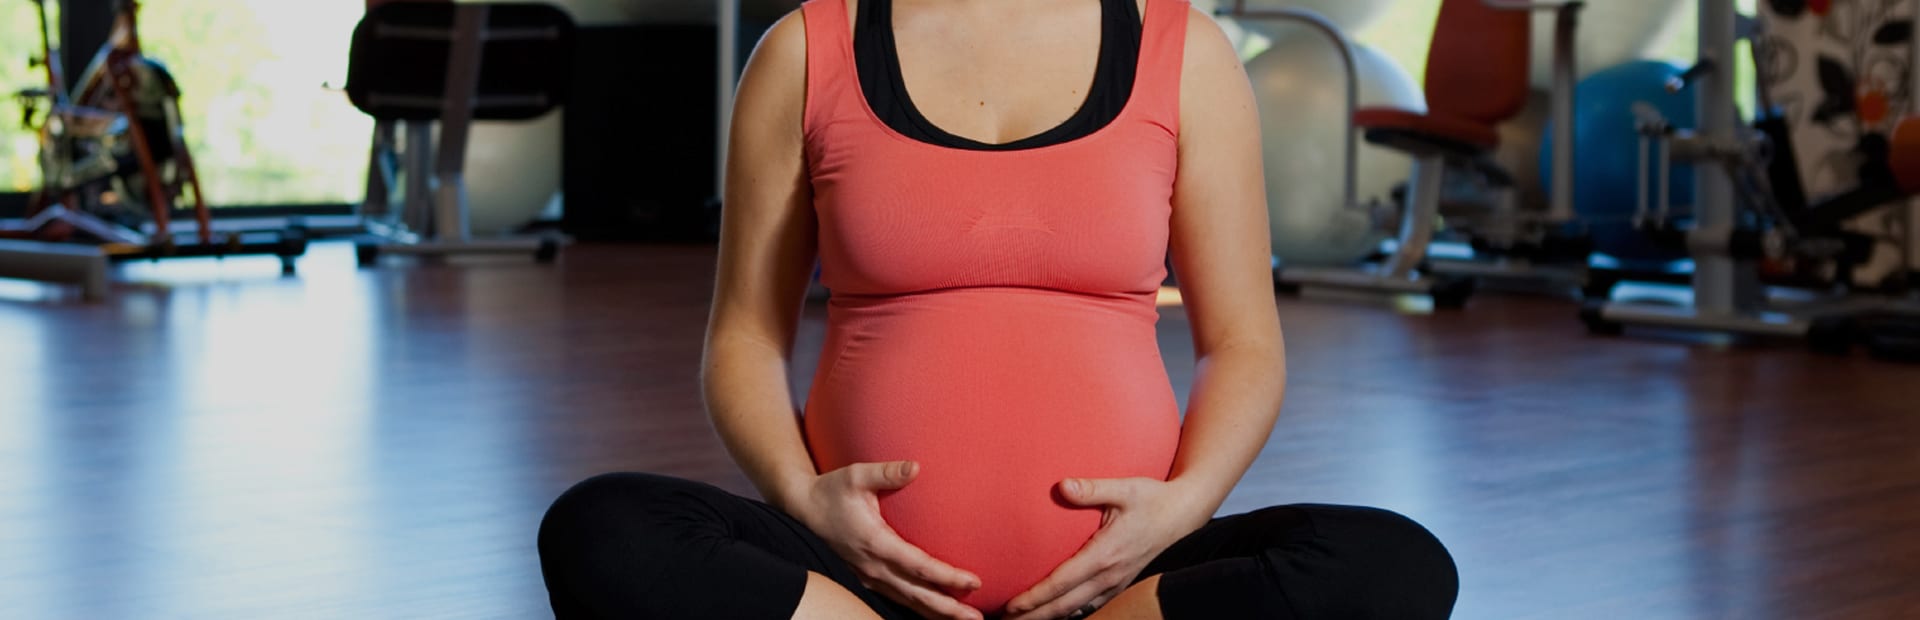 Pregnant client in an exercise studio